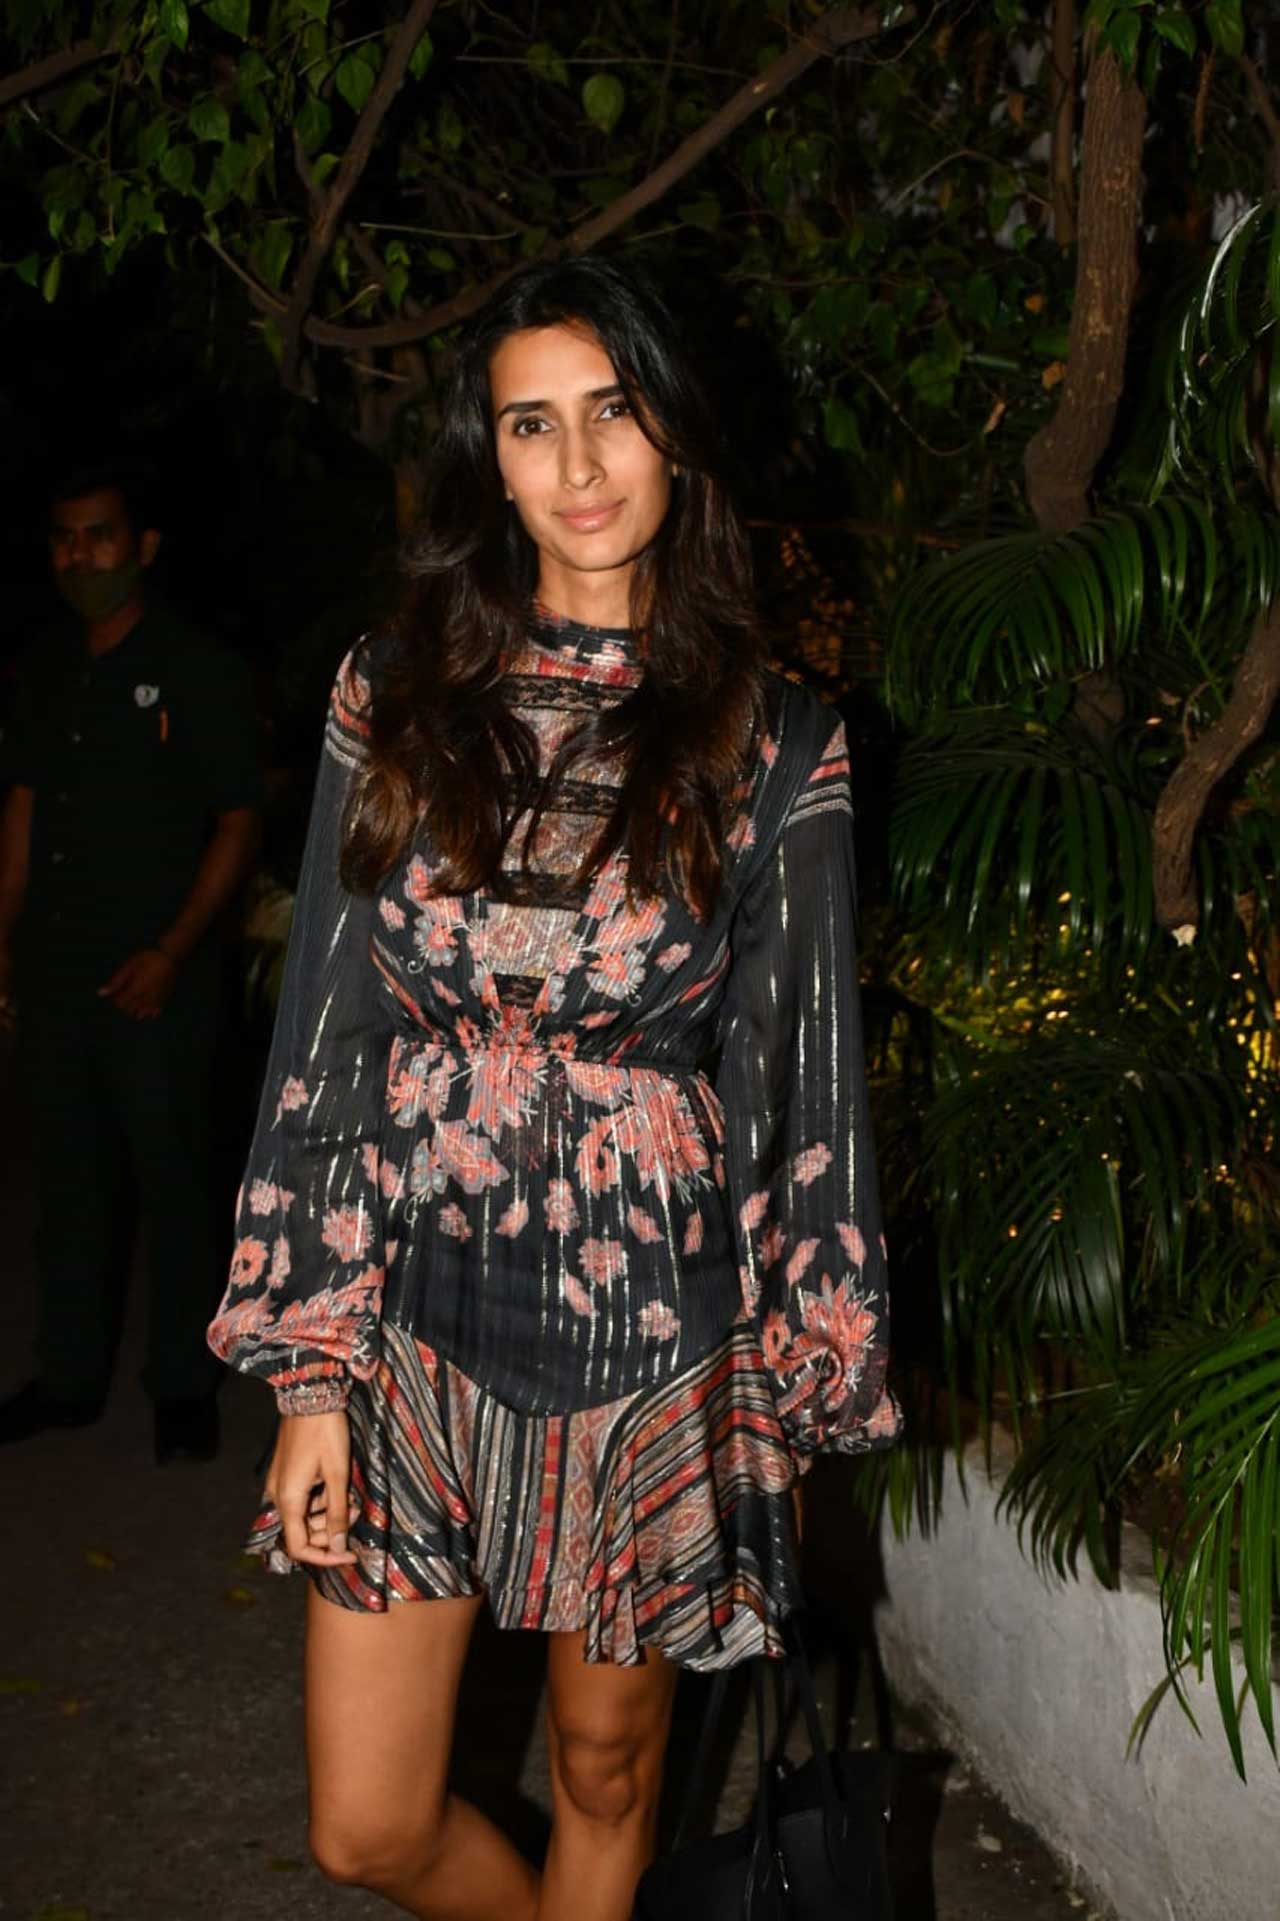 Pragya Kapoor opted for an abstract print dress, while Vaani Kapoor chose a black body-hugging dress.